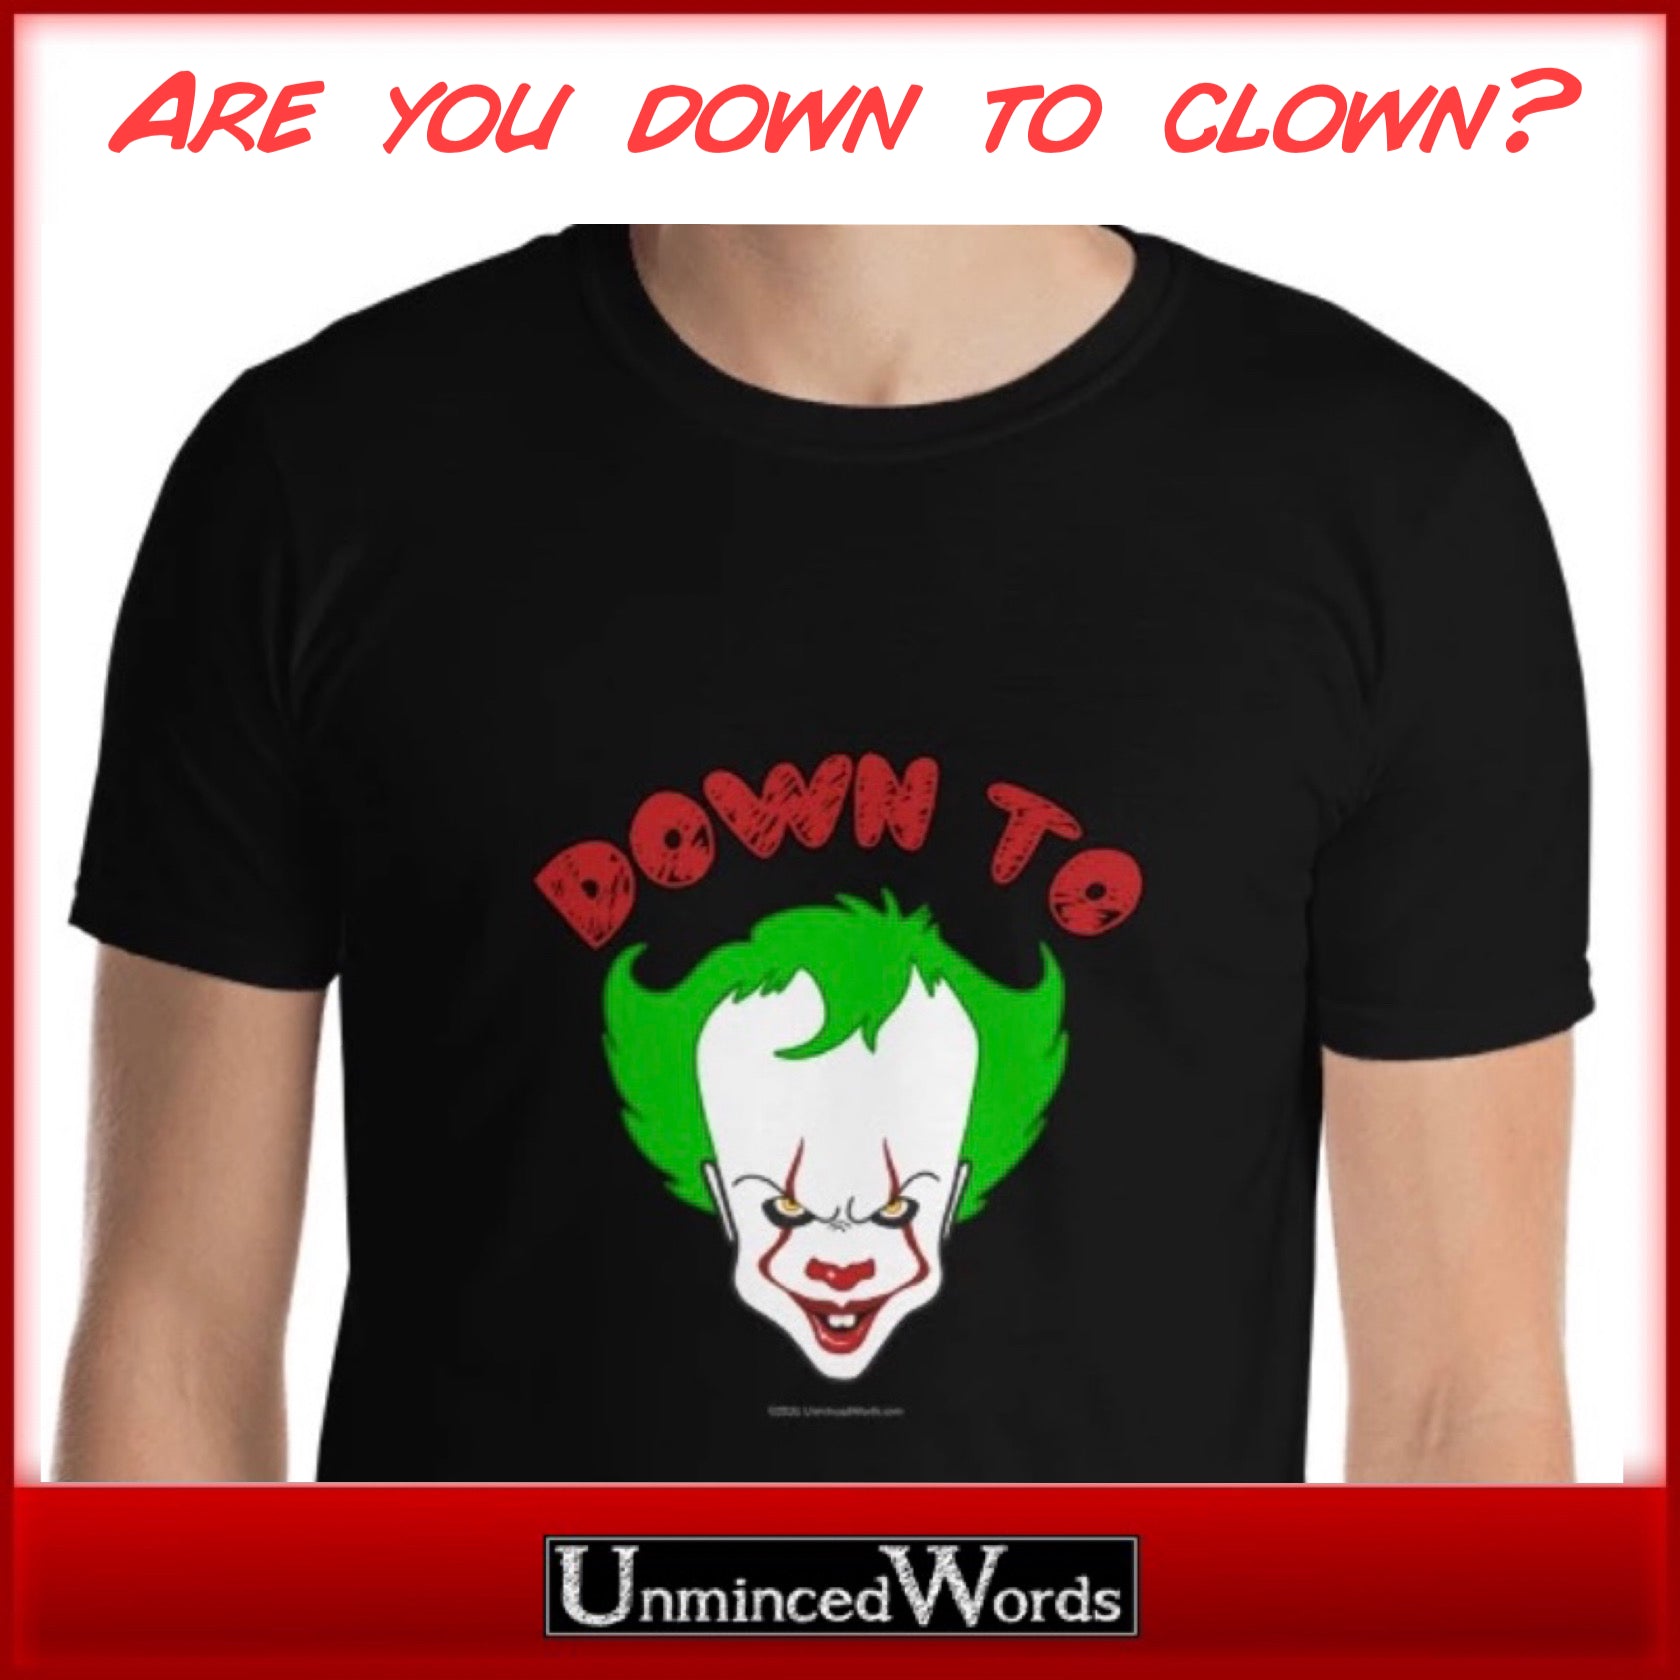 Down To Clown is our new collection